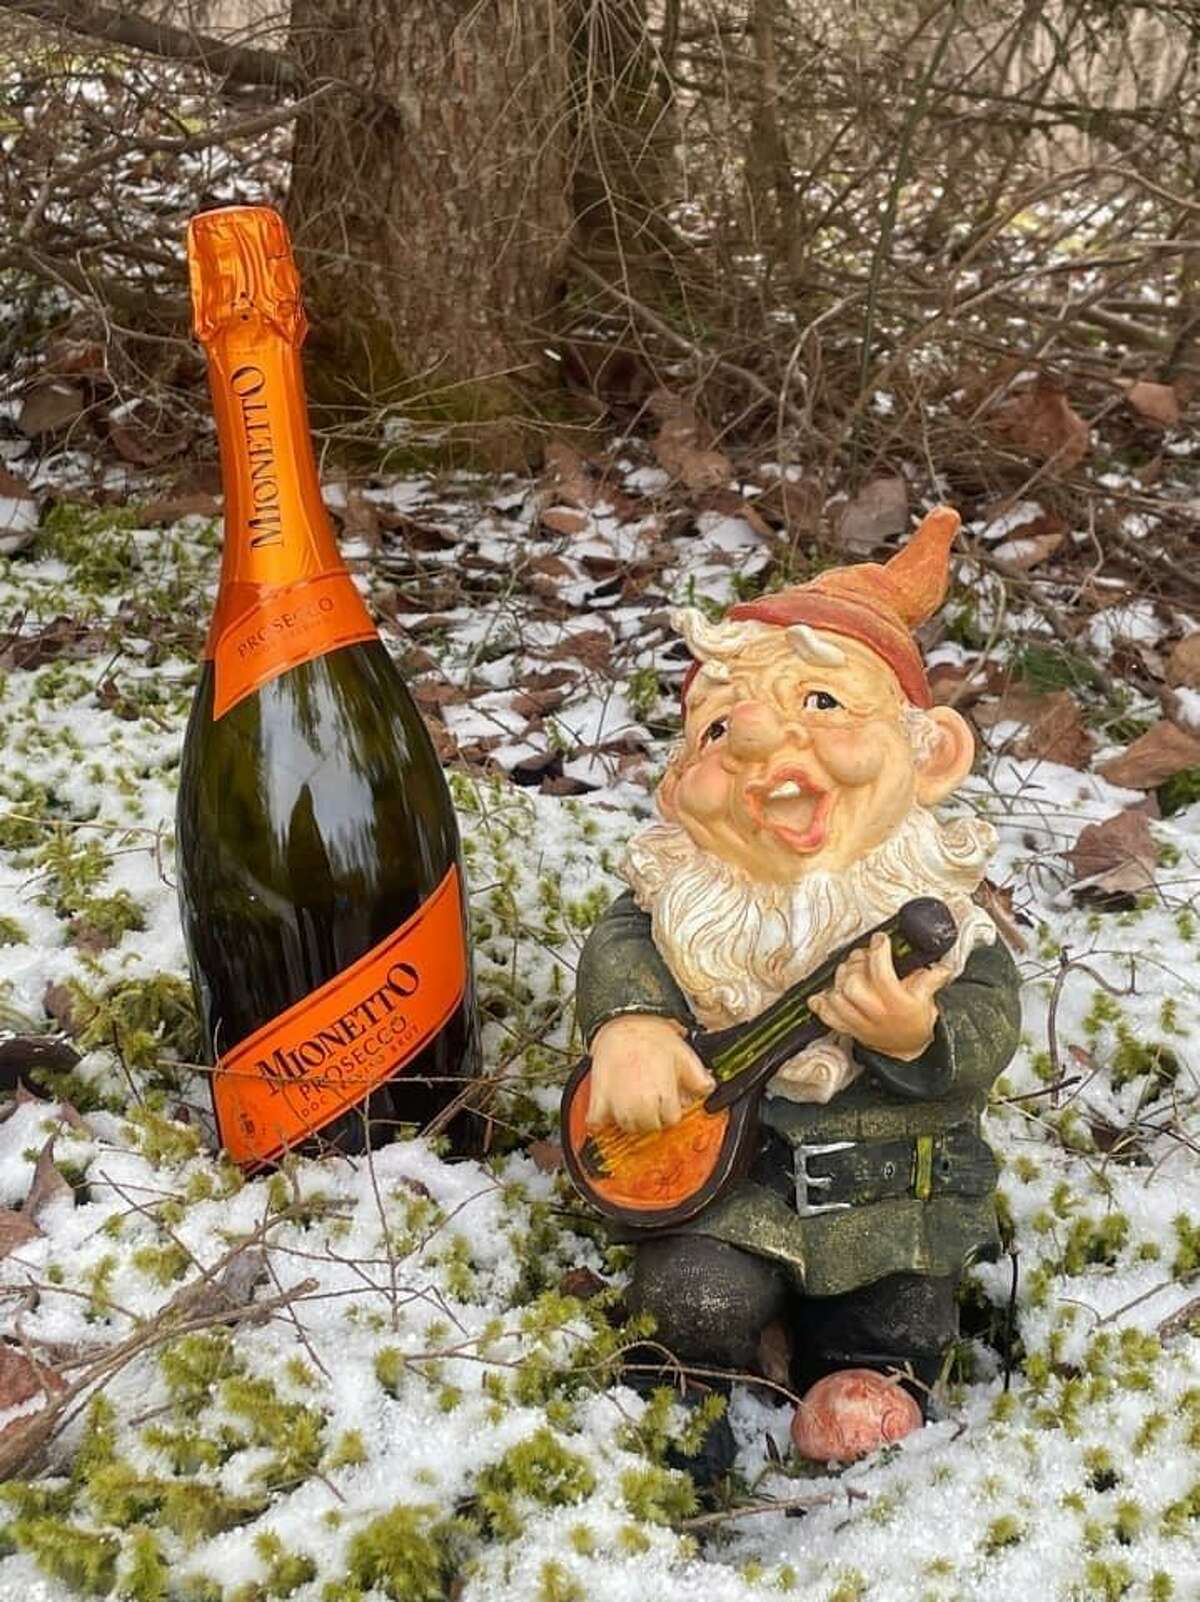 Pierre the garden gnome, Kevin Fisher-Paulson’s gift to friends Amanda and Ann, poses with a bottle of bubbly.